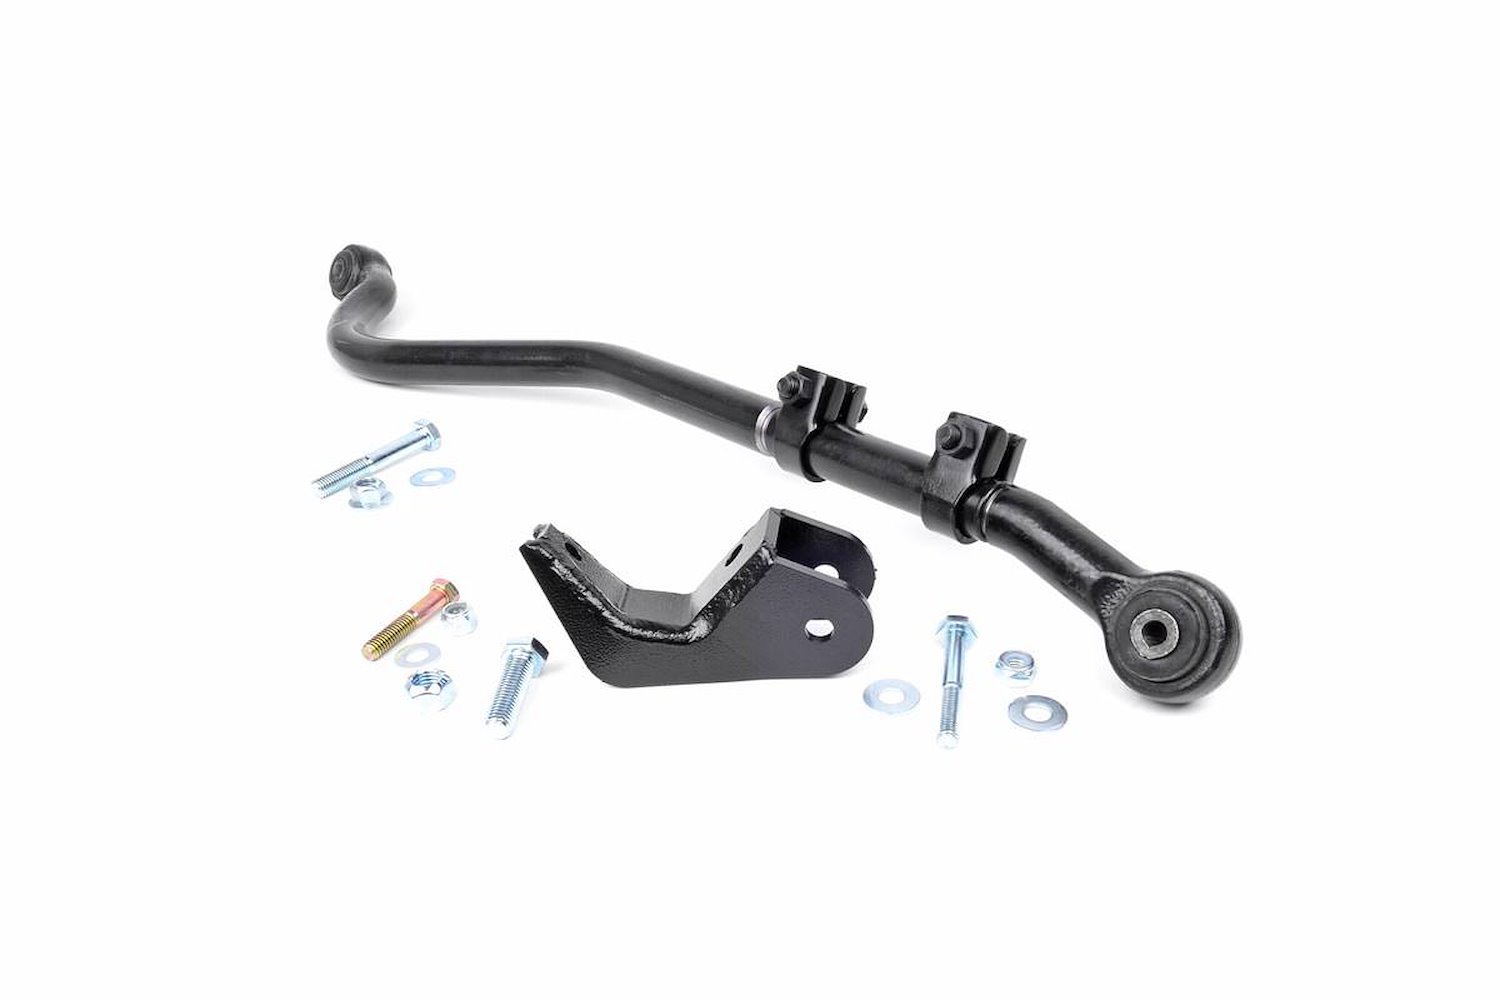 1044 Front Forged Adjustable Track Bar for 0-3.5-inch Lifts